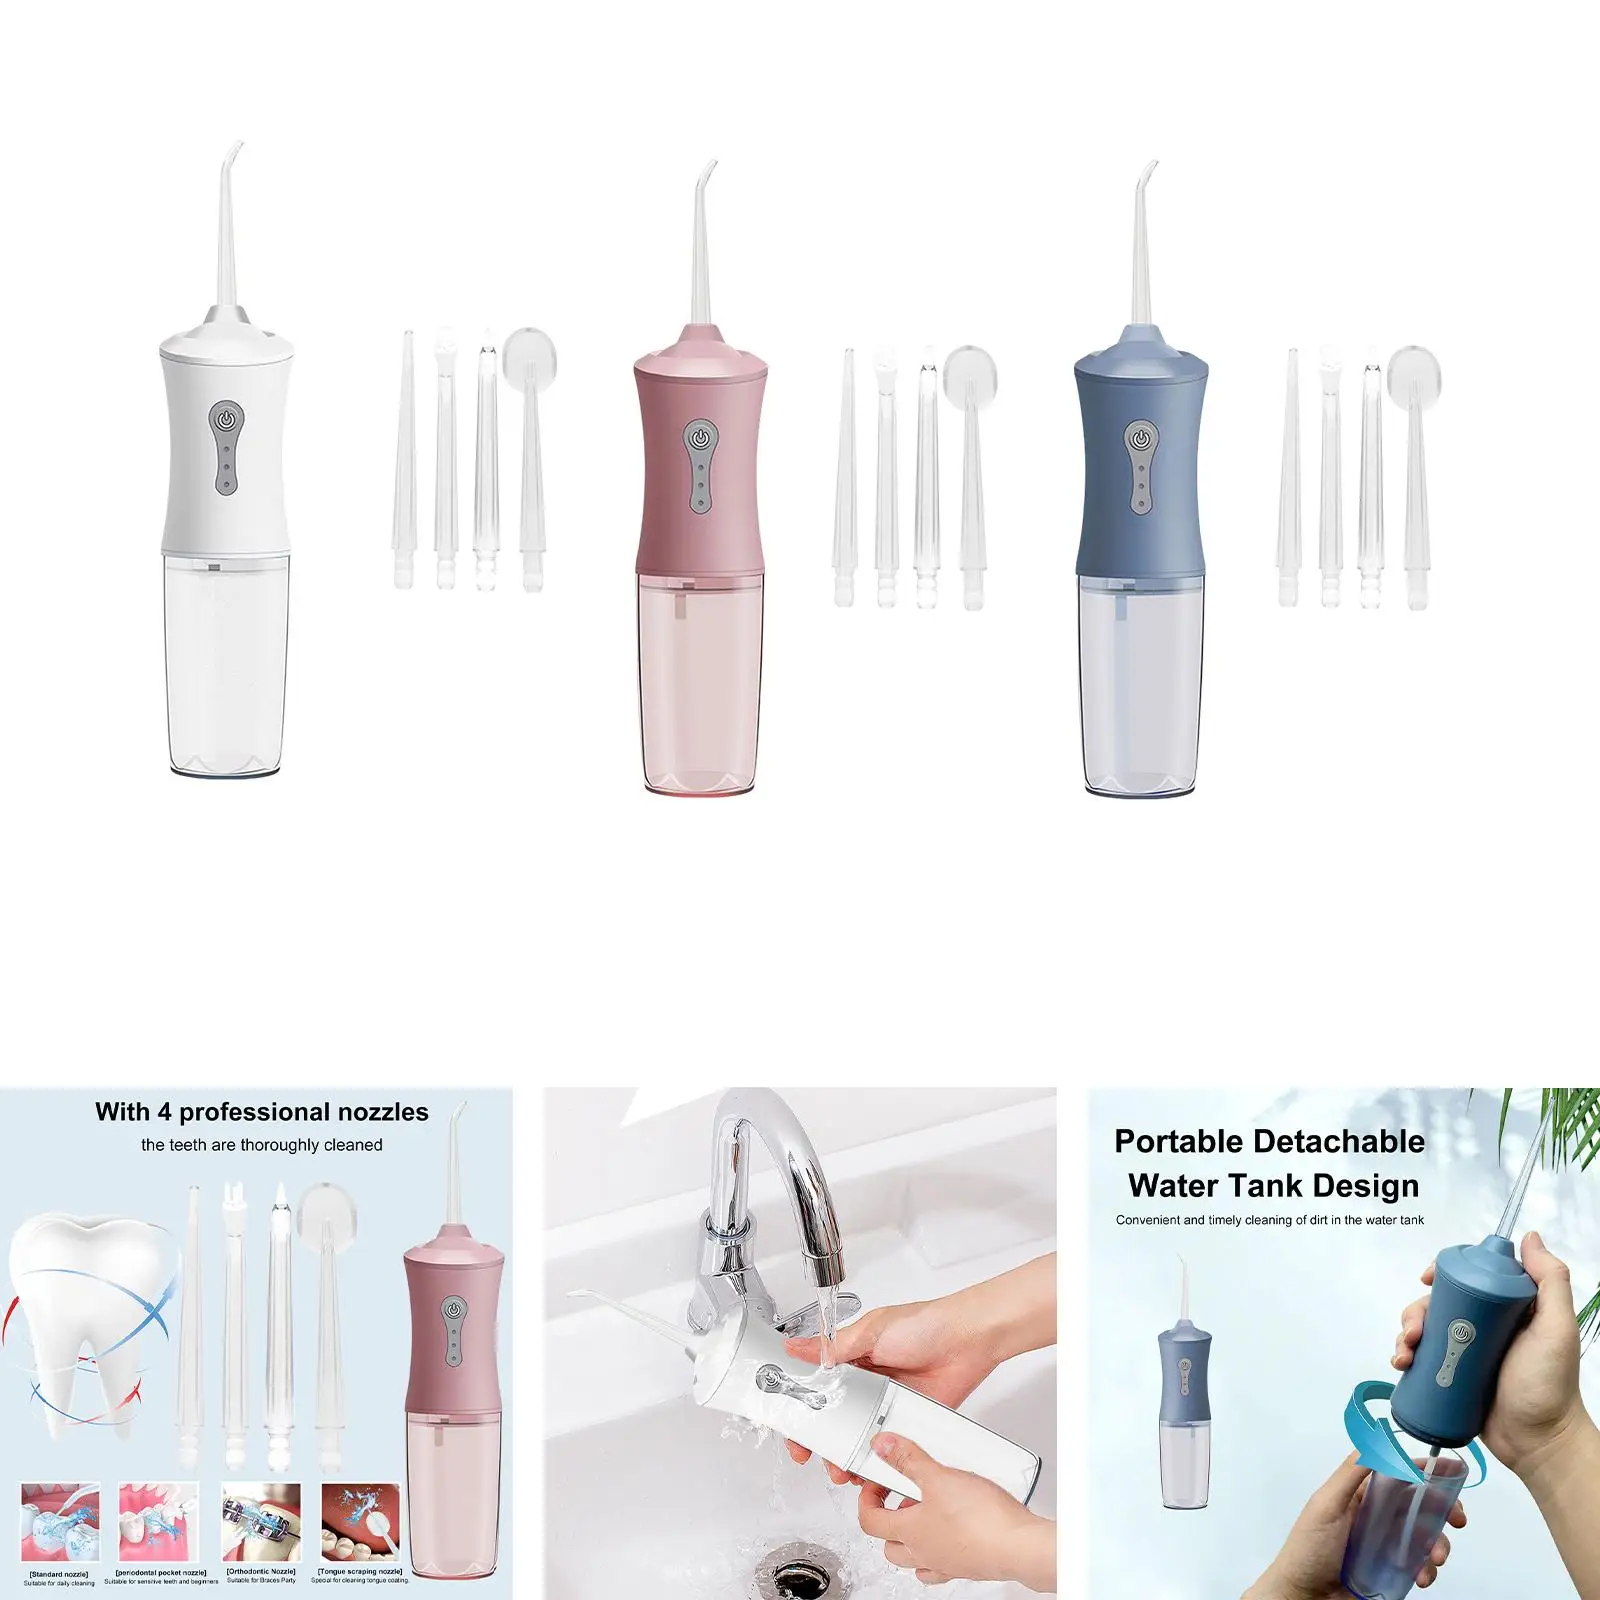 Cordless Oral Irrigator Professional Rechargeable IPX7 Waterproof Adjustable Pressure 220ml Water Tank with 4 Nozzles Water Jet